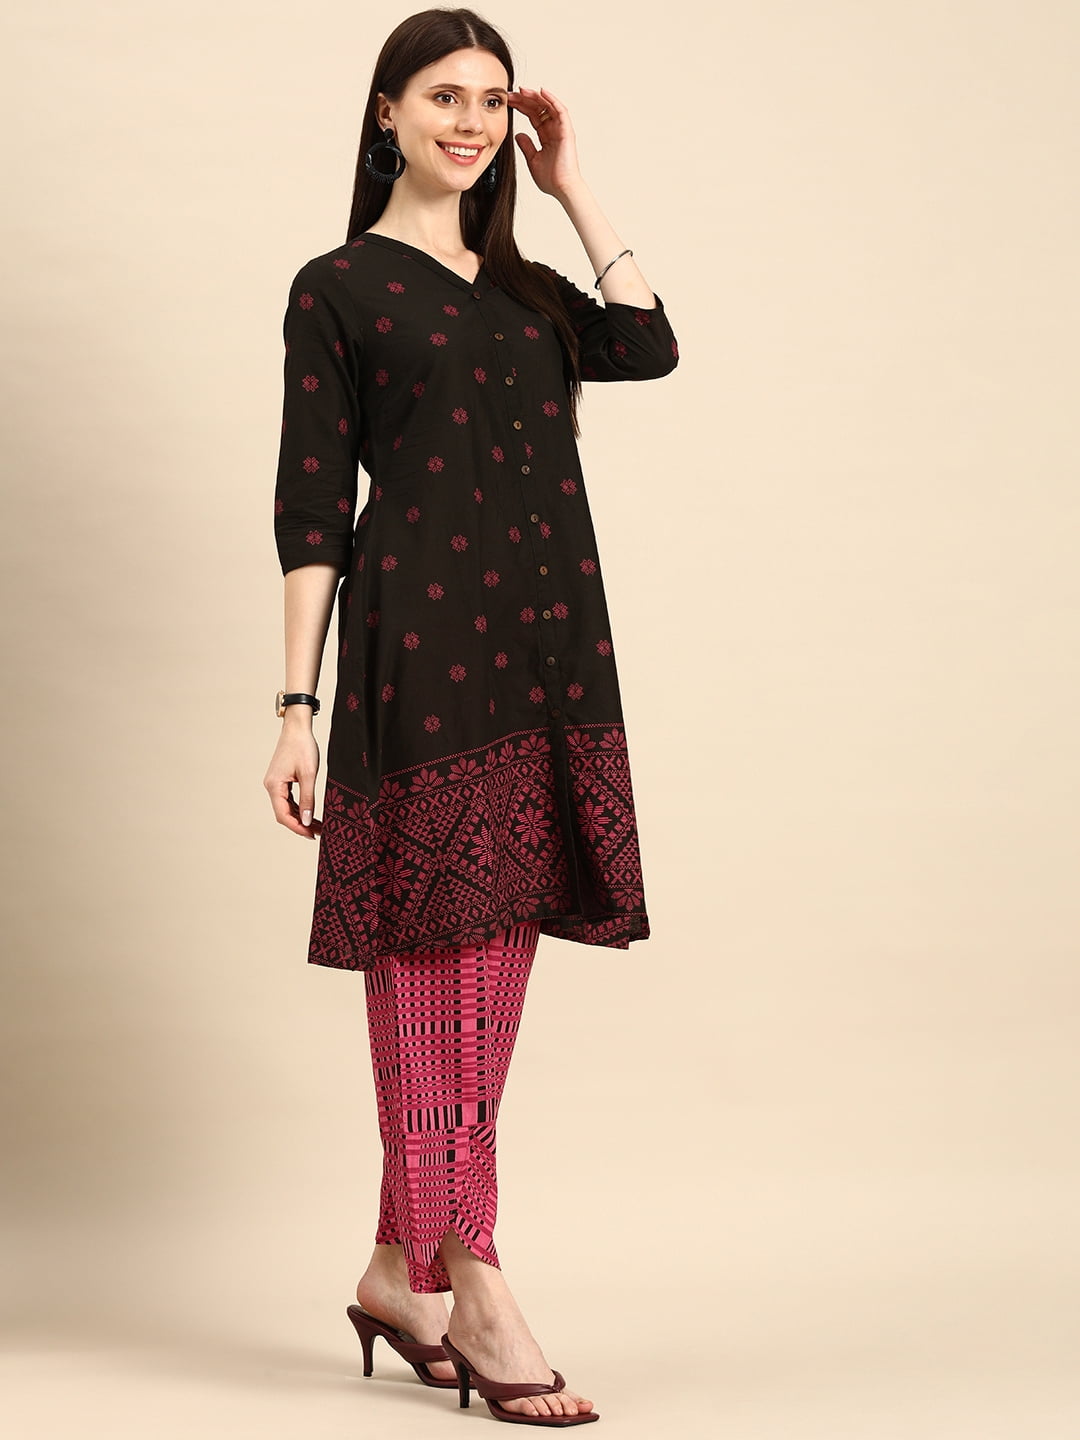 Are You Looking for Comfortable Yet Fashionable Woolen Kurtis to Keep You  Warm This Winter? Here Are Some of the Best Available Online!